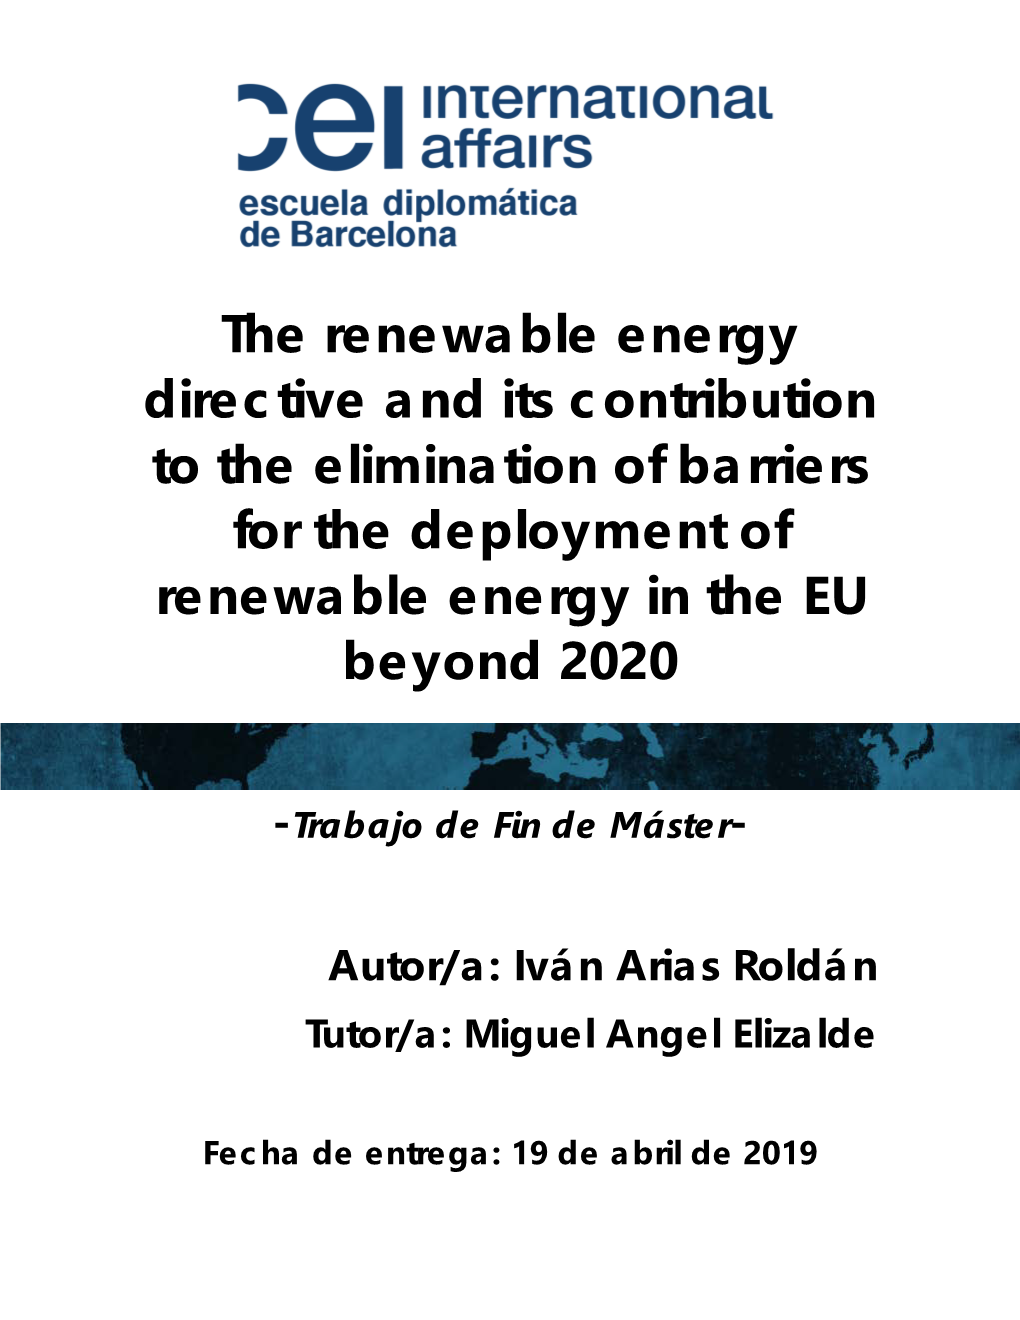 The Renewable Energy Directive and Its Contribution to the Elimination of Barriers for the Deployment of Renewable Energy in the EU Beyond 2020